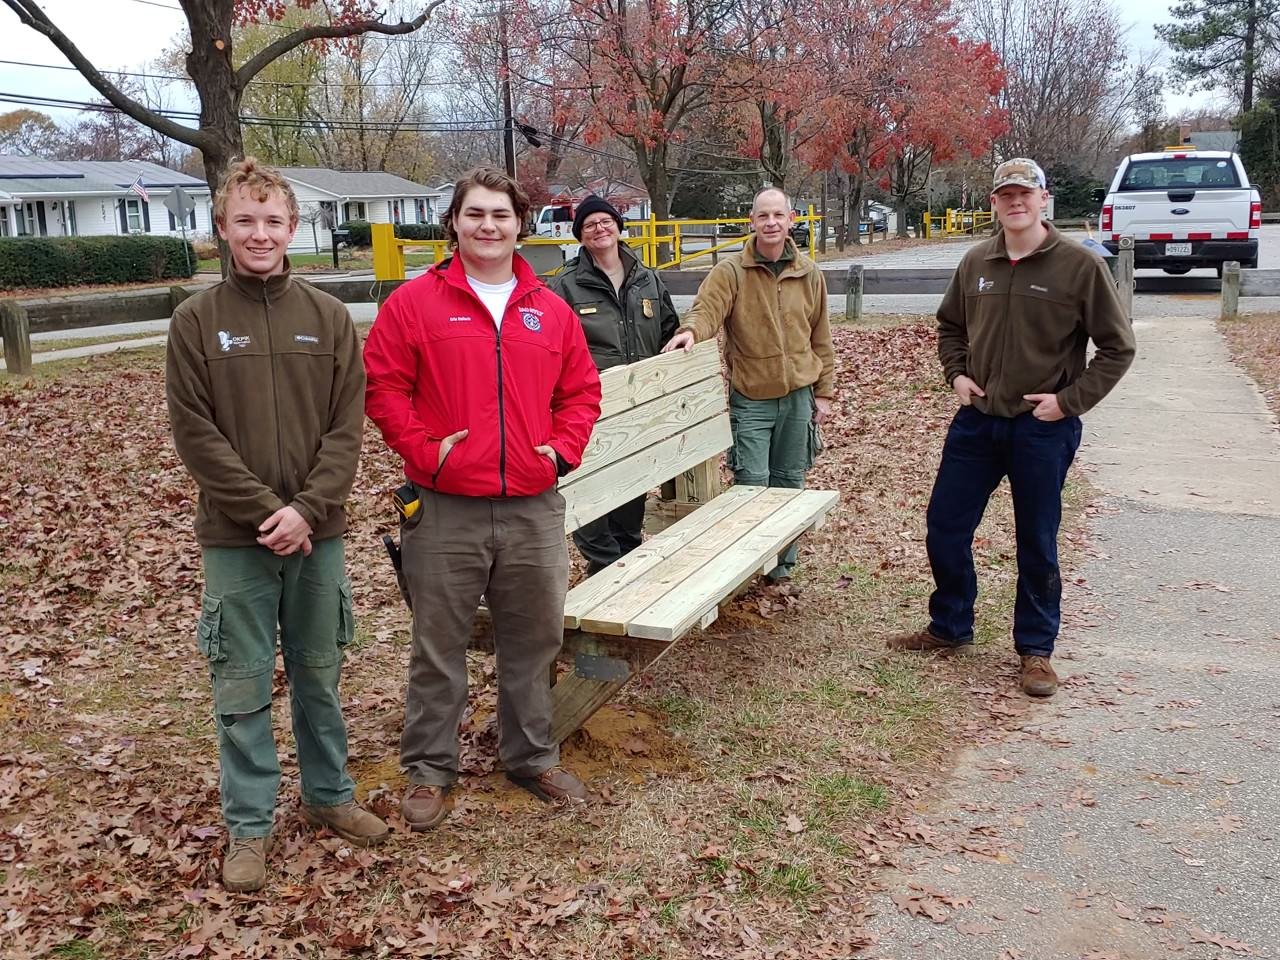 Scouts and adults gathered at Belvedere Park in November to help Eric Heisch build benches.